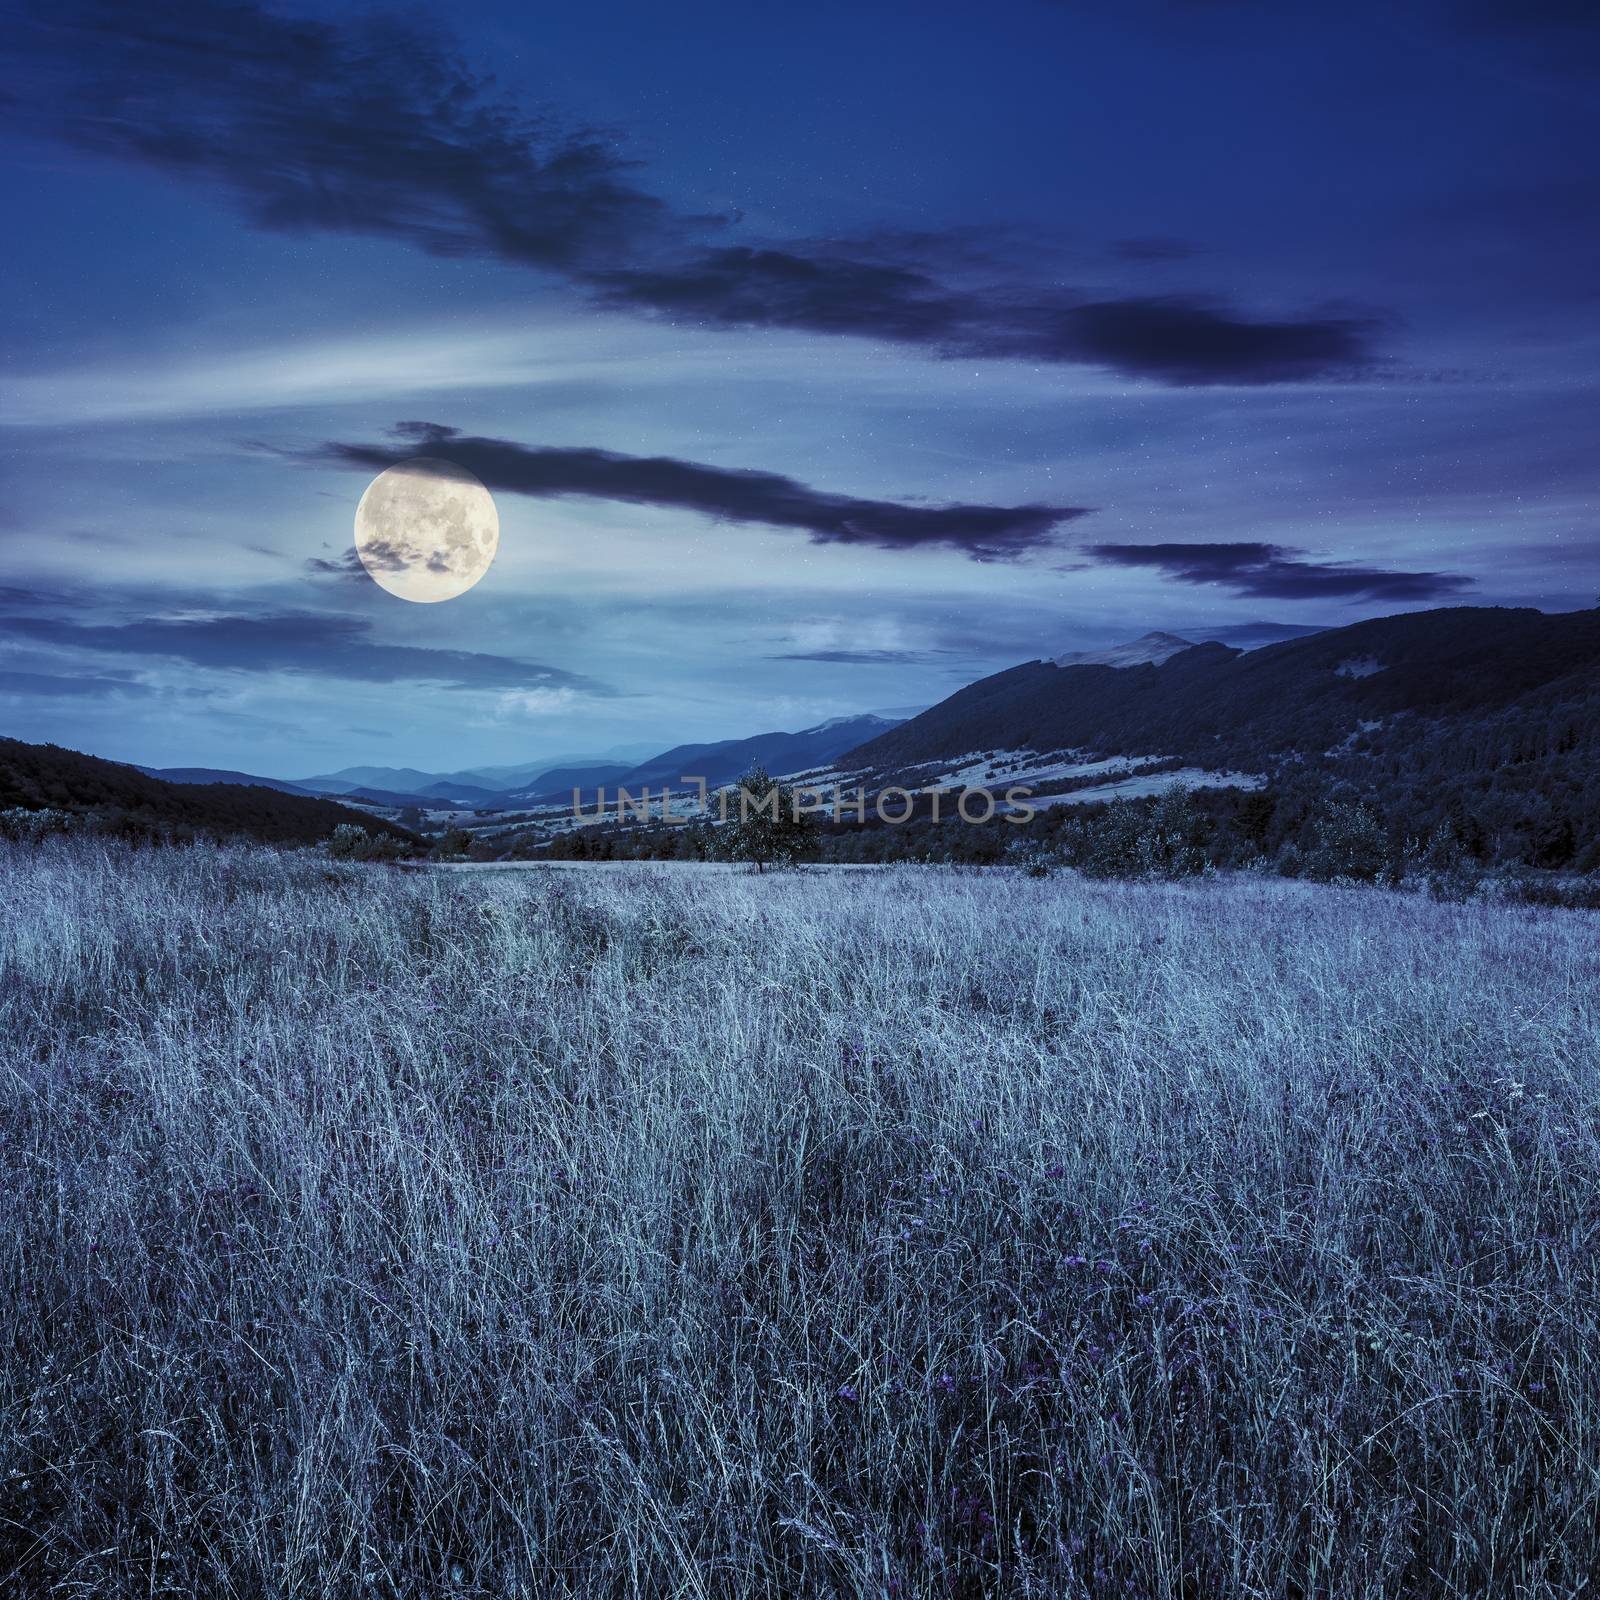 meadow in the mountains under a blue summer sky at night in full moon light